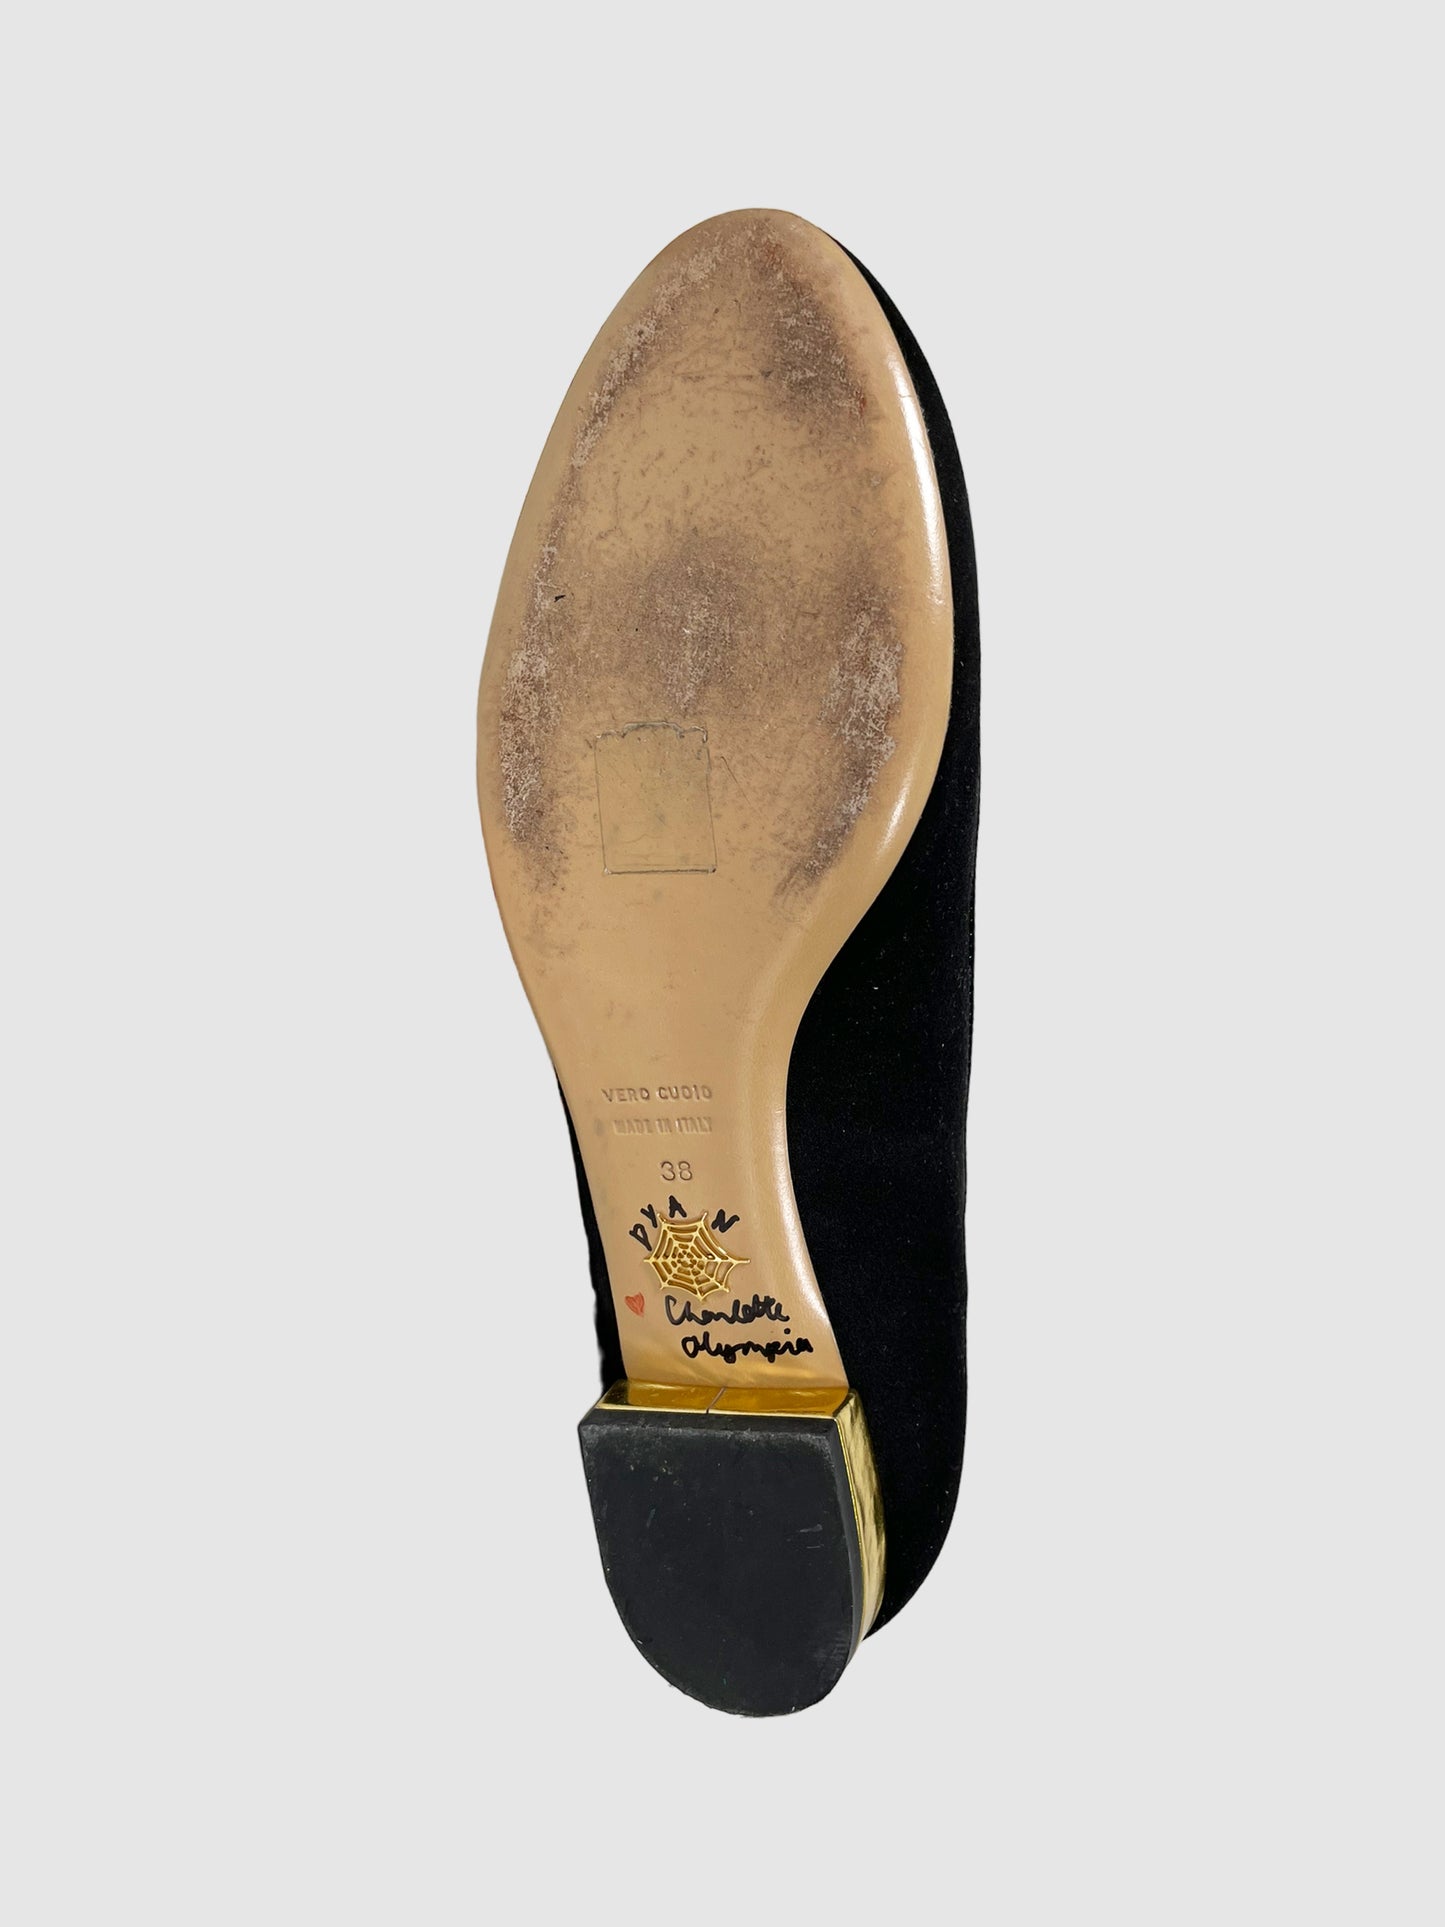 Charlotte Olympia Satin Loafers - Size 38